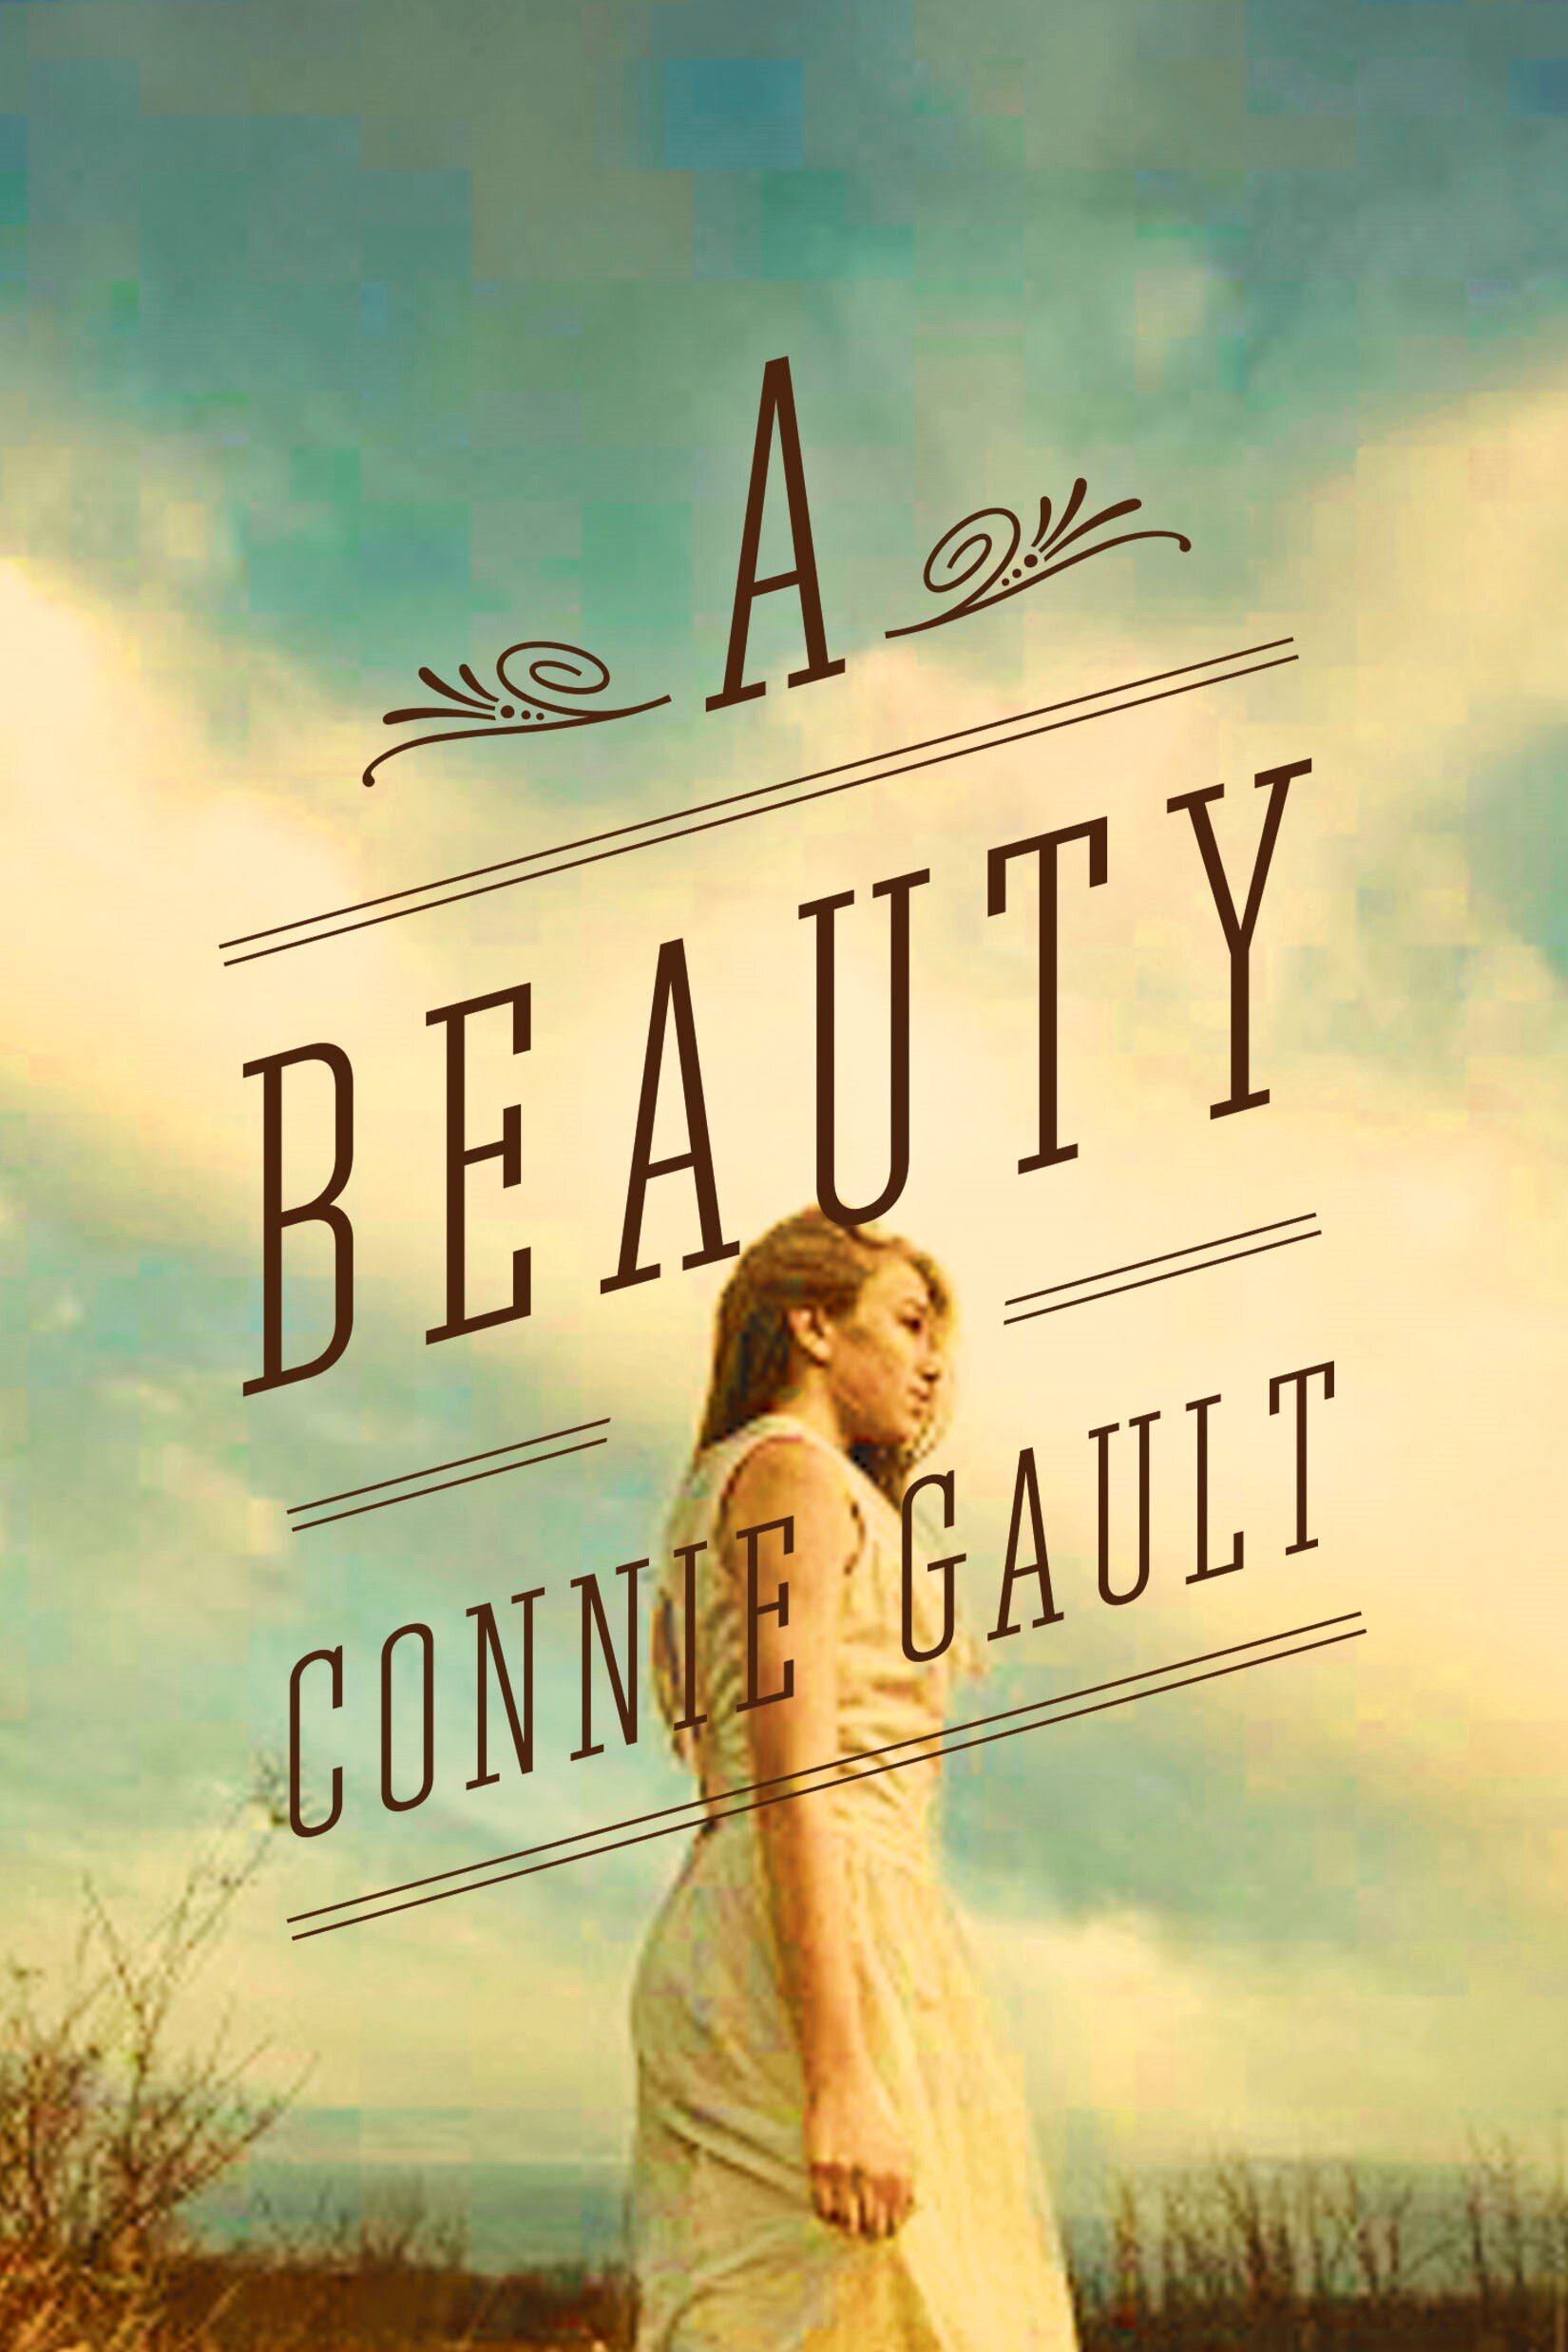 Gault, Connie - A Beauty - Paperback cover.jpg